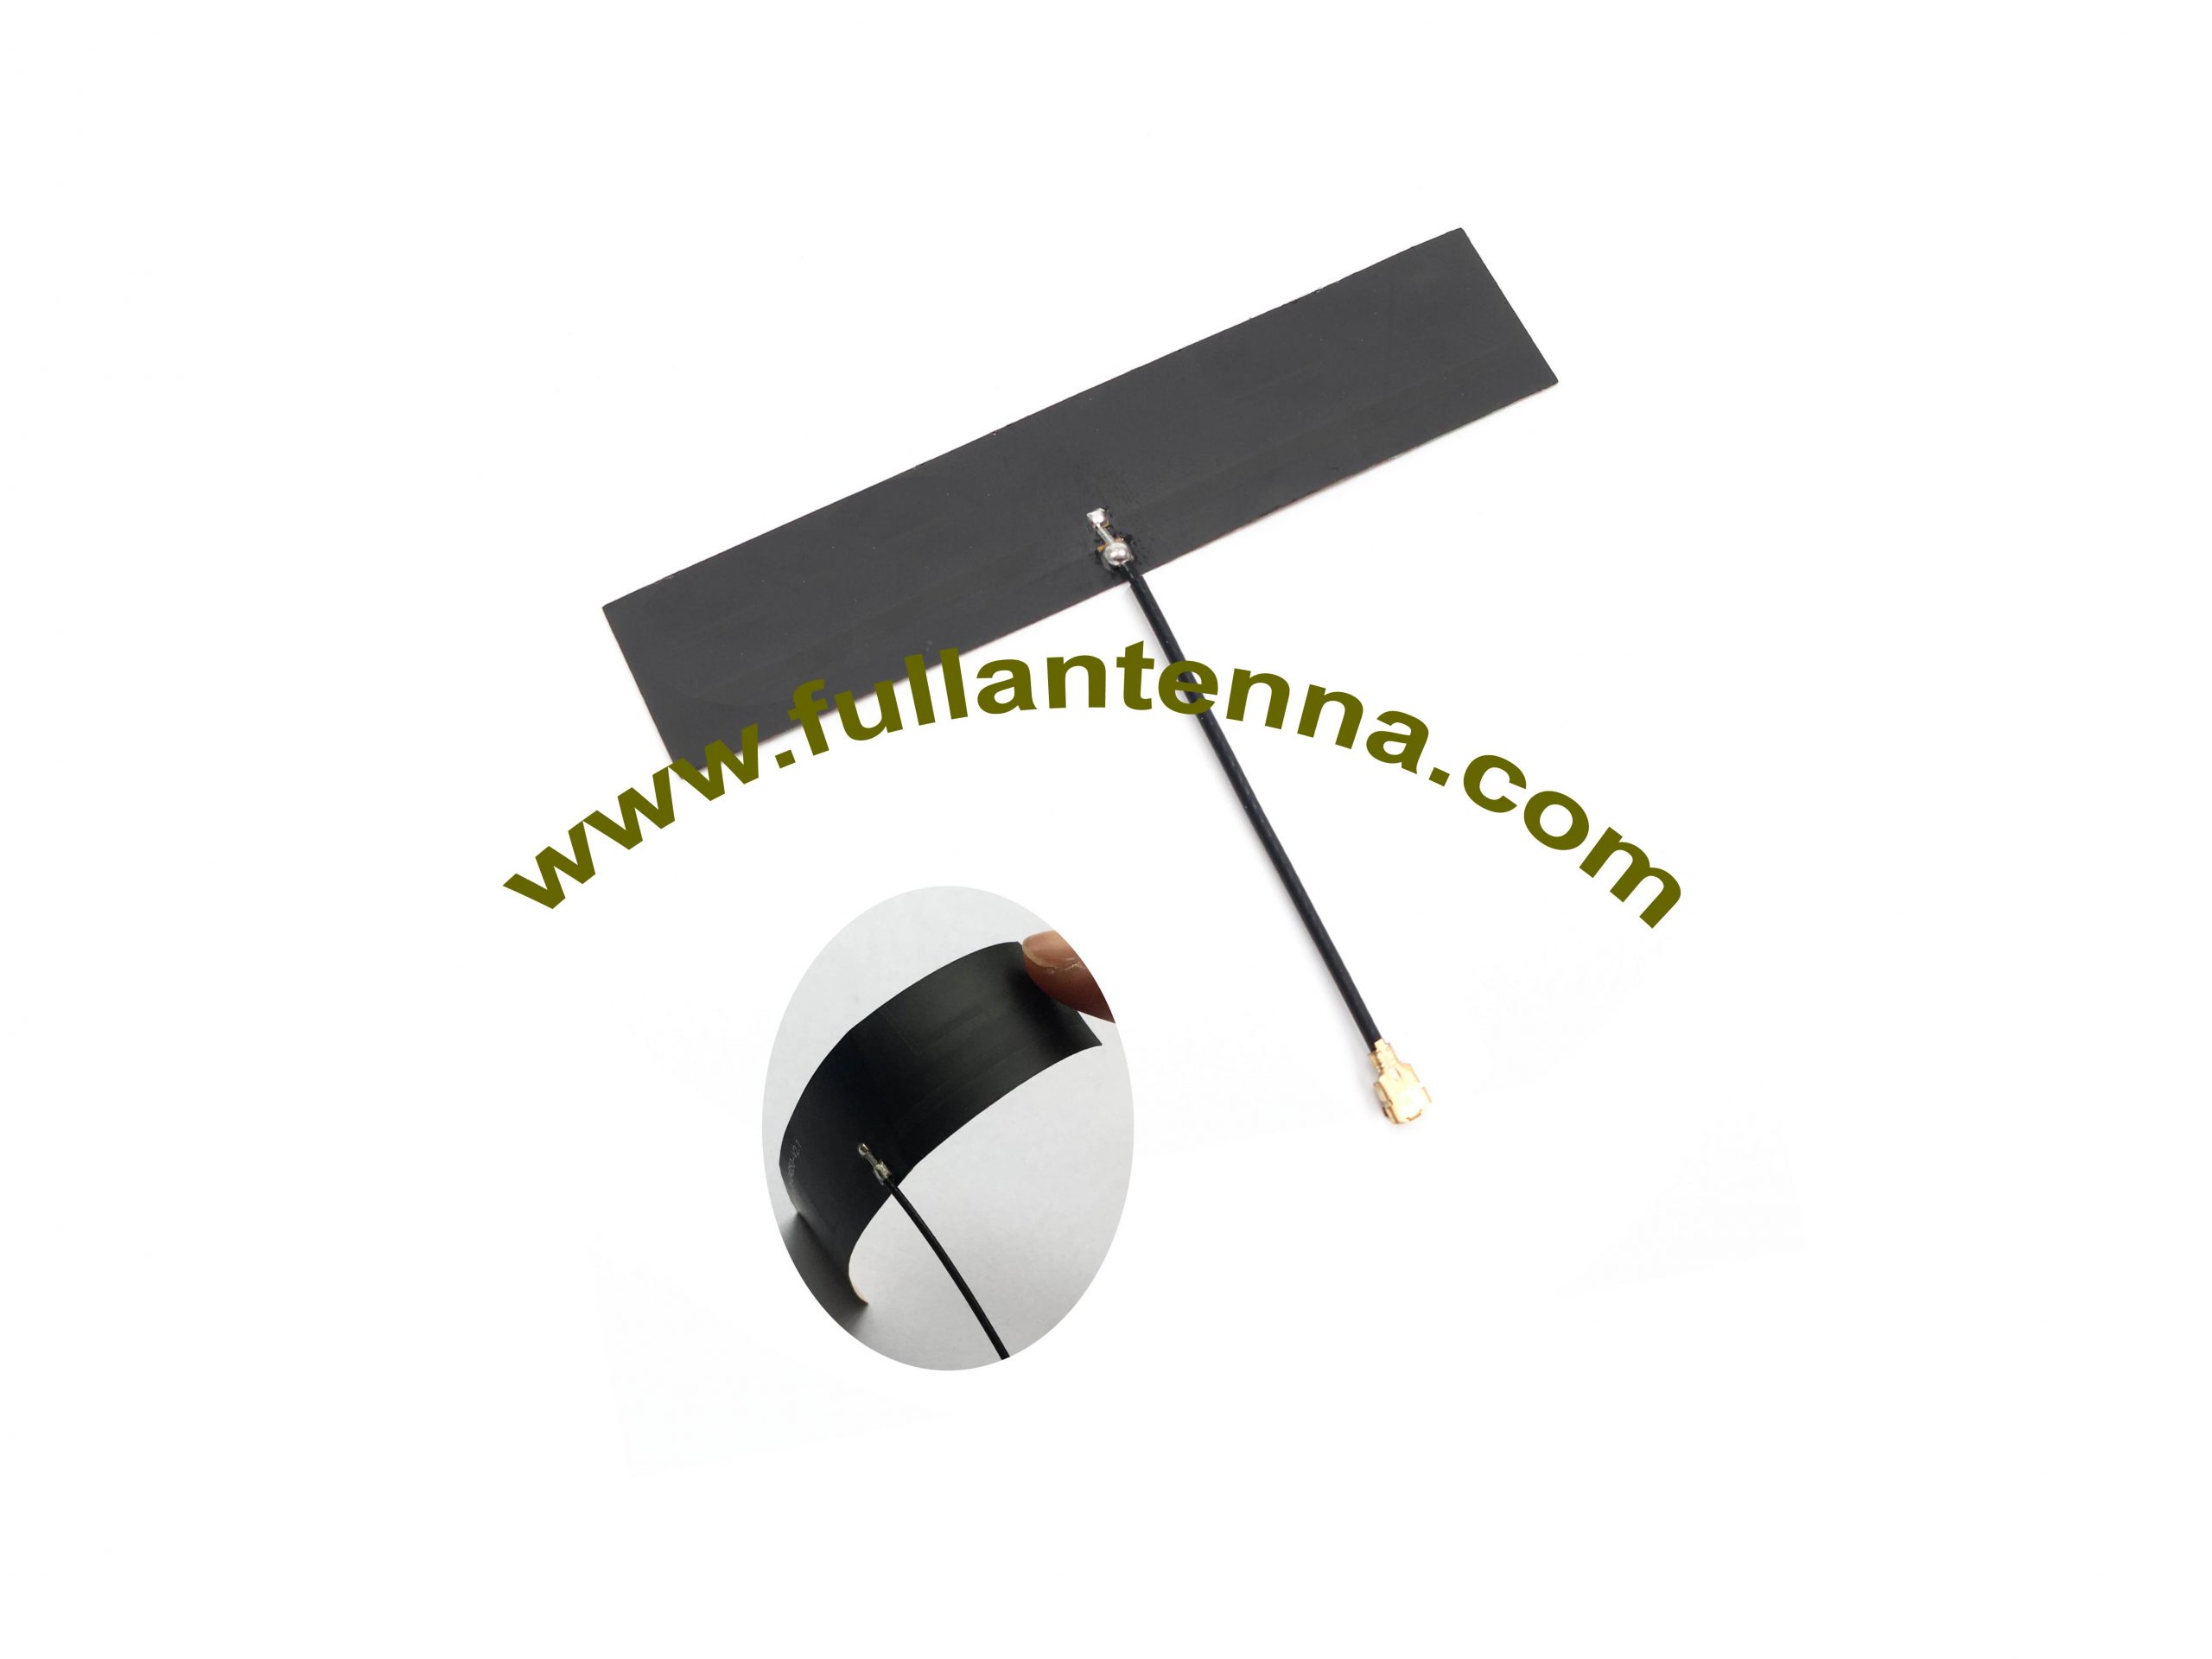 Top Quality Lte Antenna Cable - P/N:FALTEFPCB.01,4G/LTE Built-In Antenna,FPCB 4G inner antenna soft PCB – Fullantenna